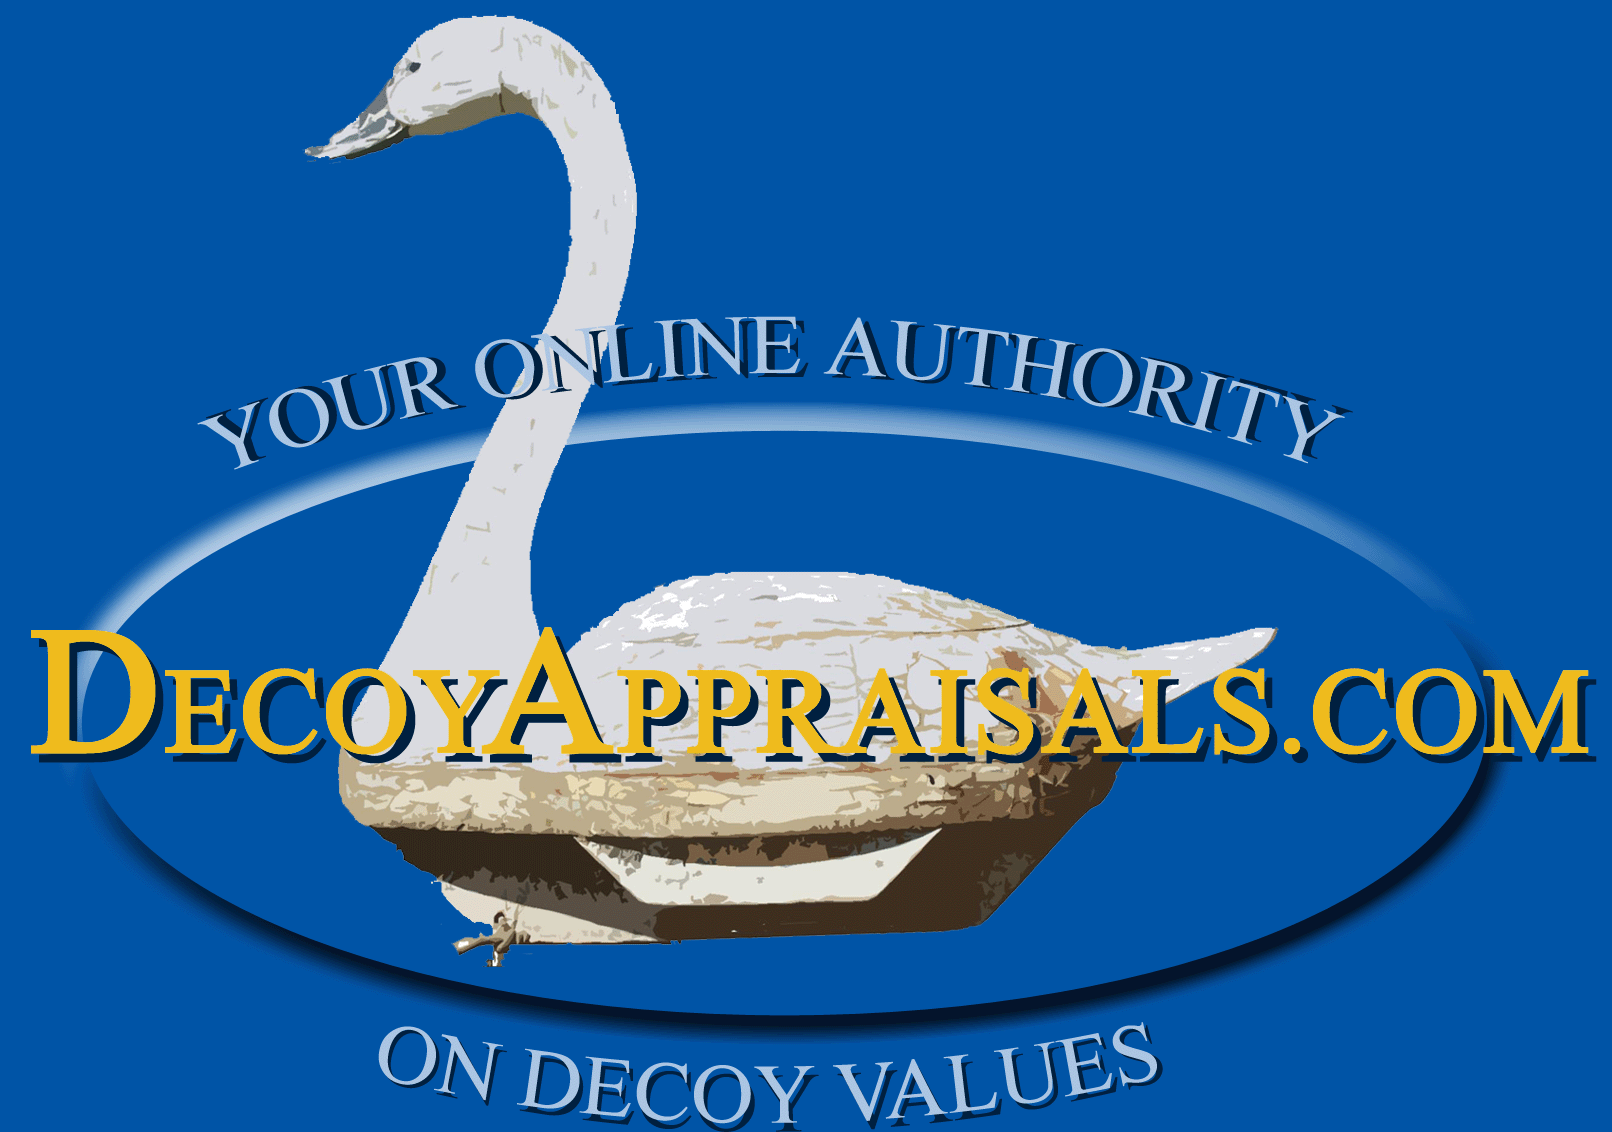 We can appraise and sell your decoy or decoys